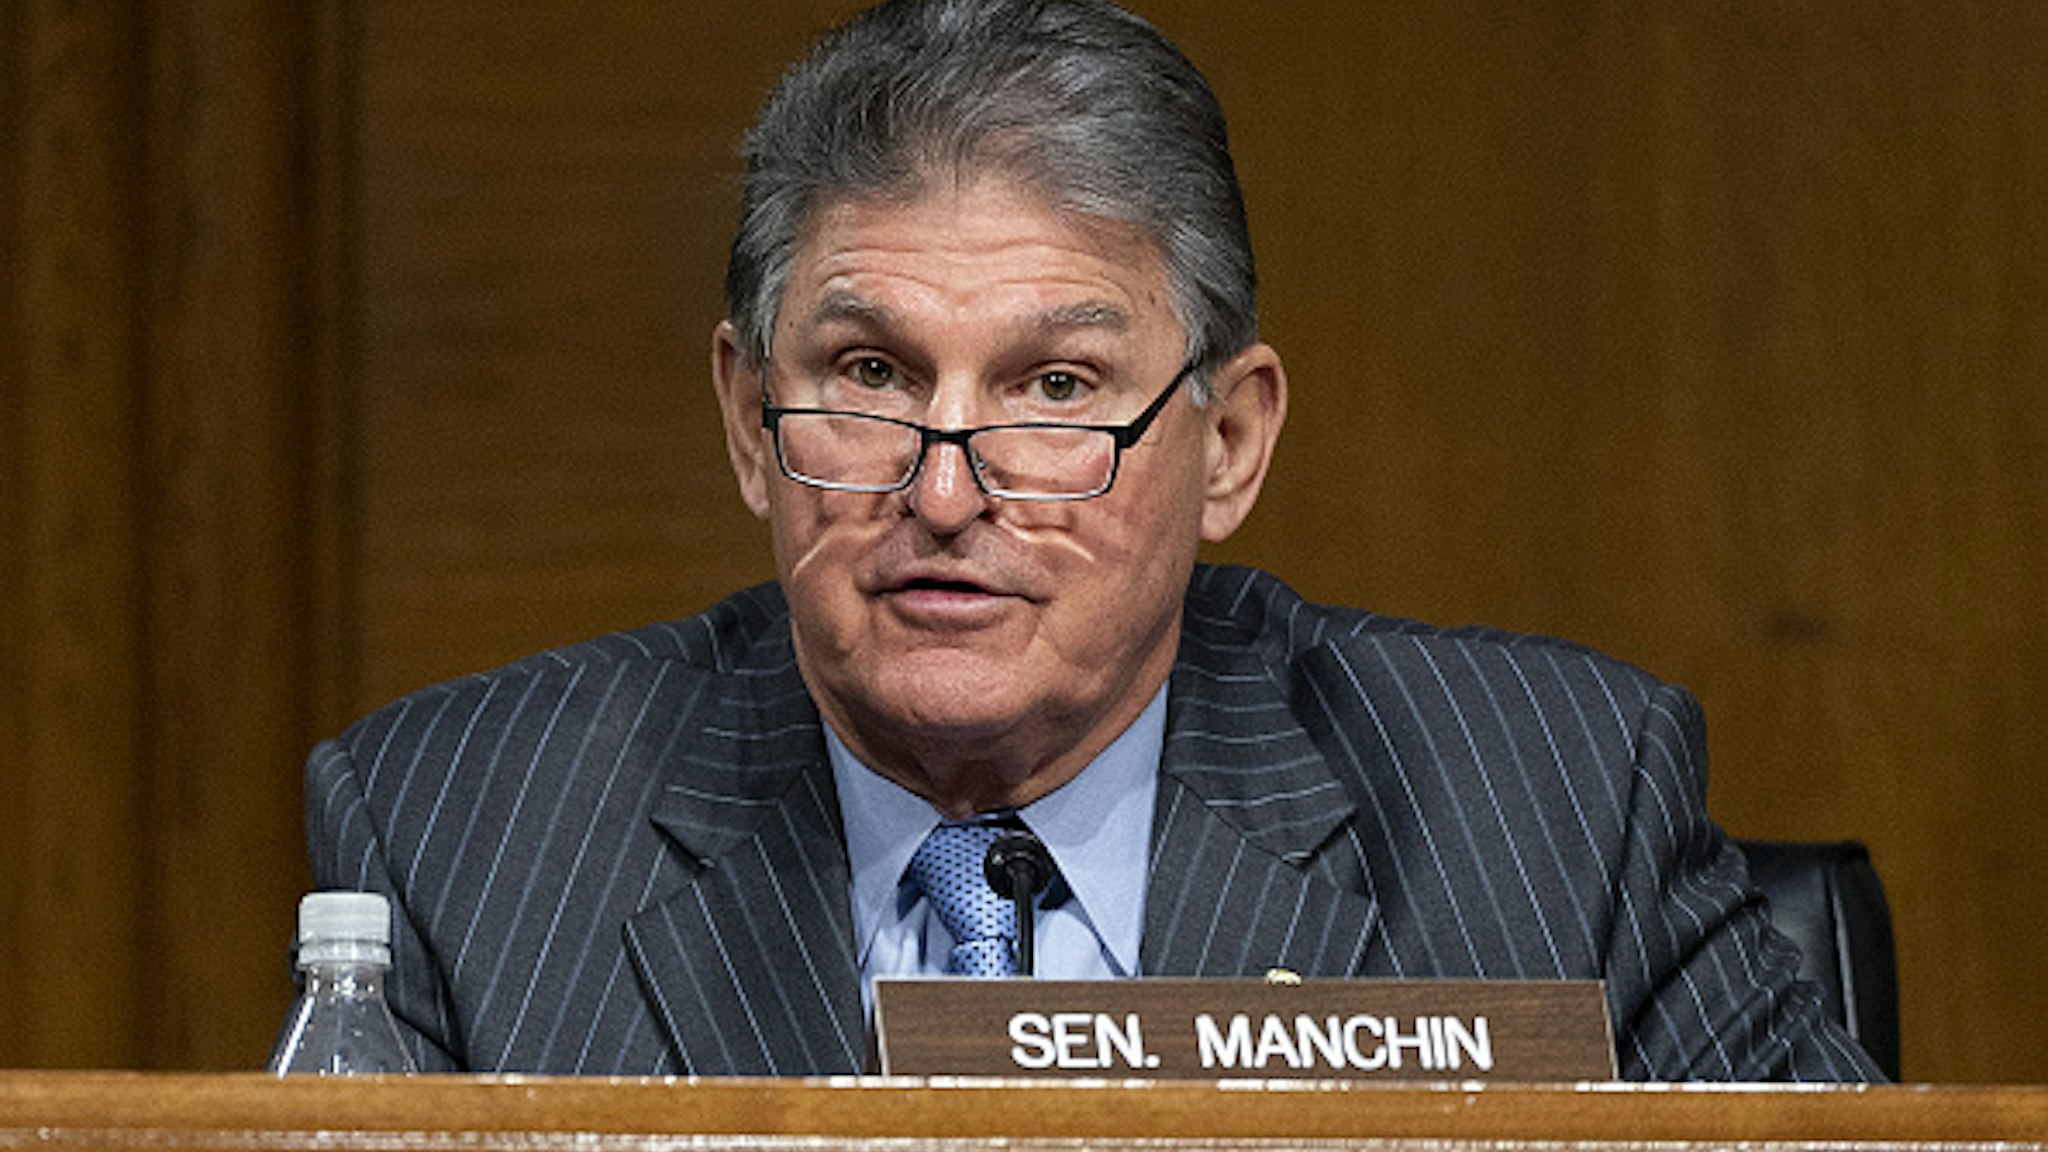 Senator Joe Manchin, a Democrat from West Virginia and ranking member of the Senate Energy and Natural Resources Committee, speaks during confirmation hearing for Jennifer Granholm, U.S. secretary of energy nominee for U.S. President Joe Biden, in Washington, D.C., U.S., on Wednesday, Jan. 27, 2021. Granholm, the former governor of the politically pivotal state of Michigan, if confirmed will lead the Department of Energy which is expected to play an enlarged role in the battle against climate change.